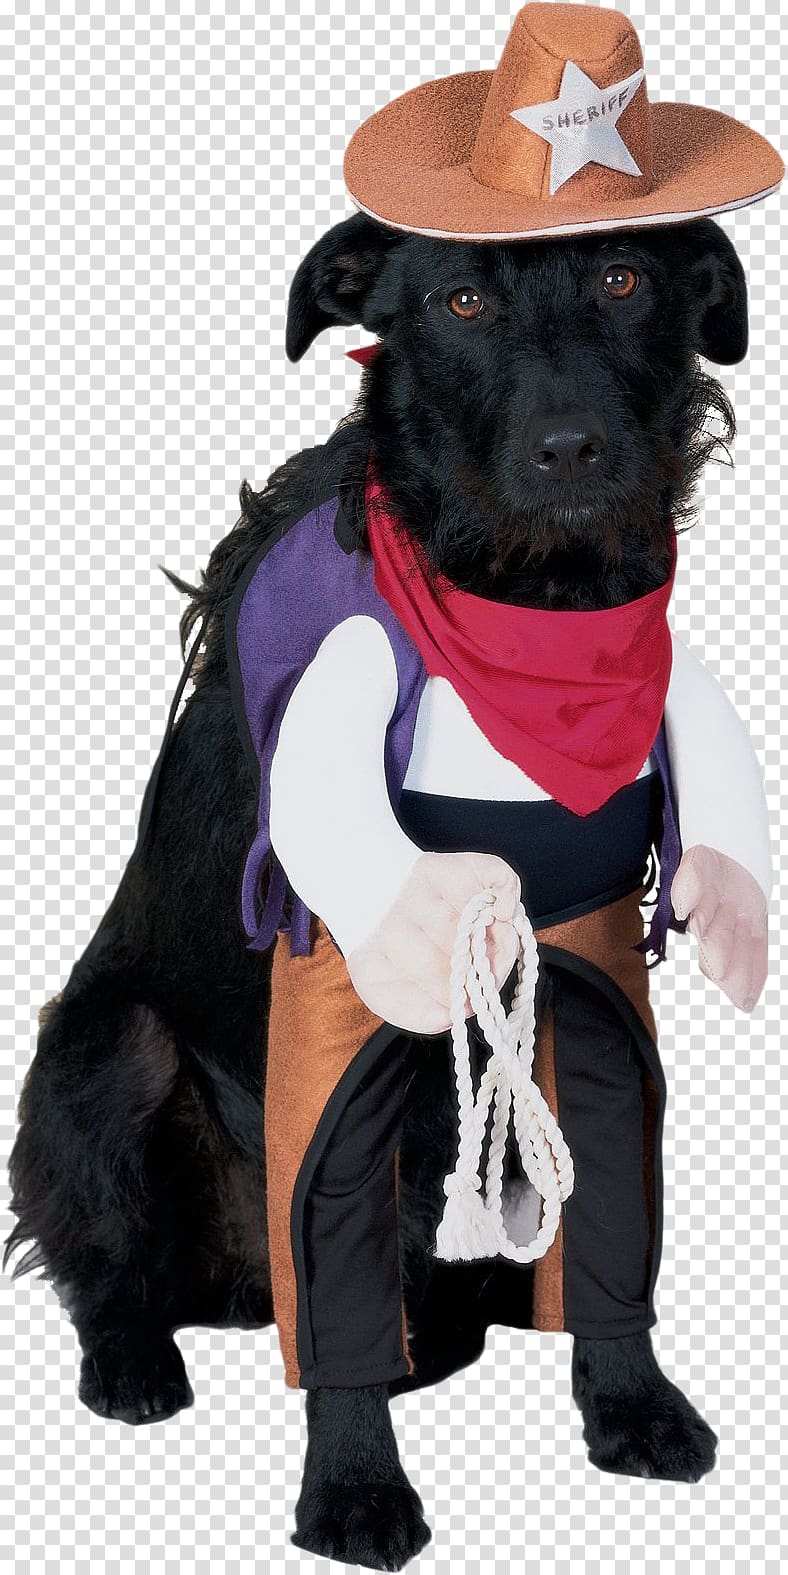 Dog Halloween costume Costume party, Dog transparent background PNG clipart